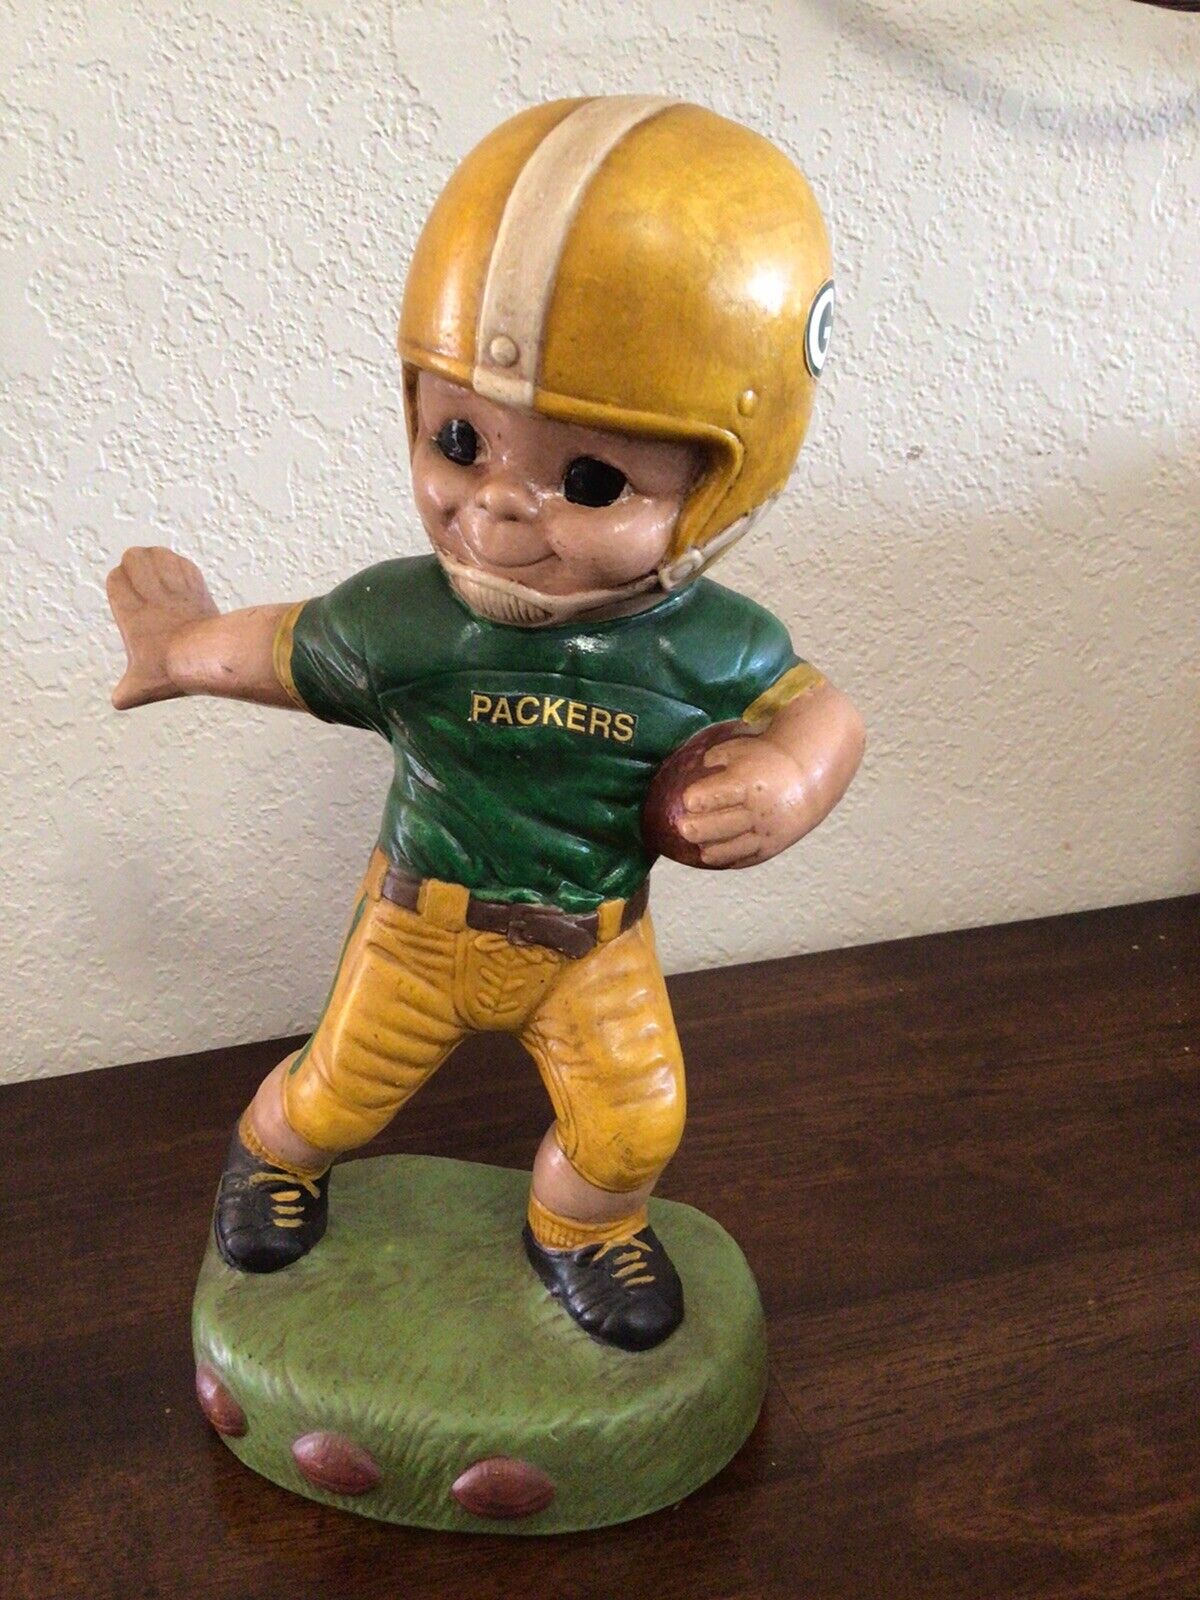 Vintage 1970s spectacular Green Bay Packers Ceramic Player, impressive Size